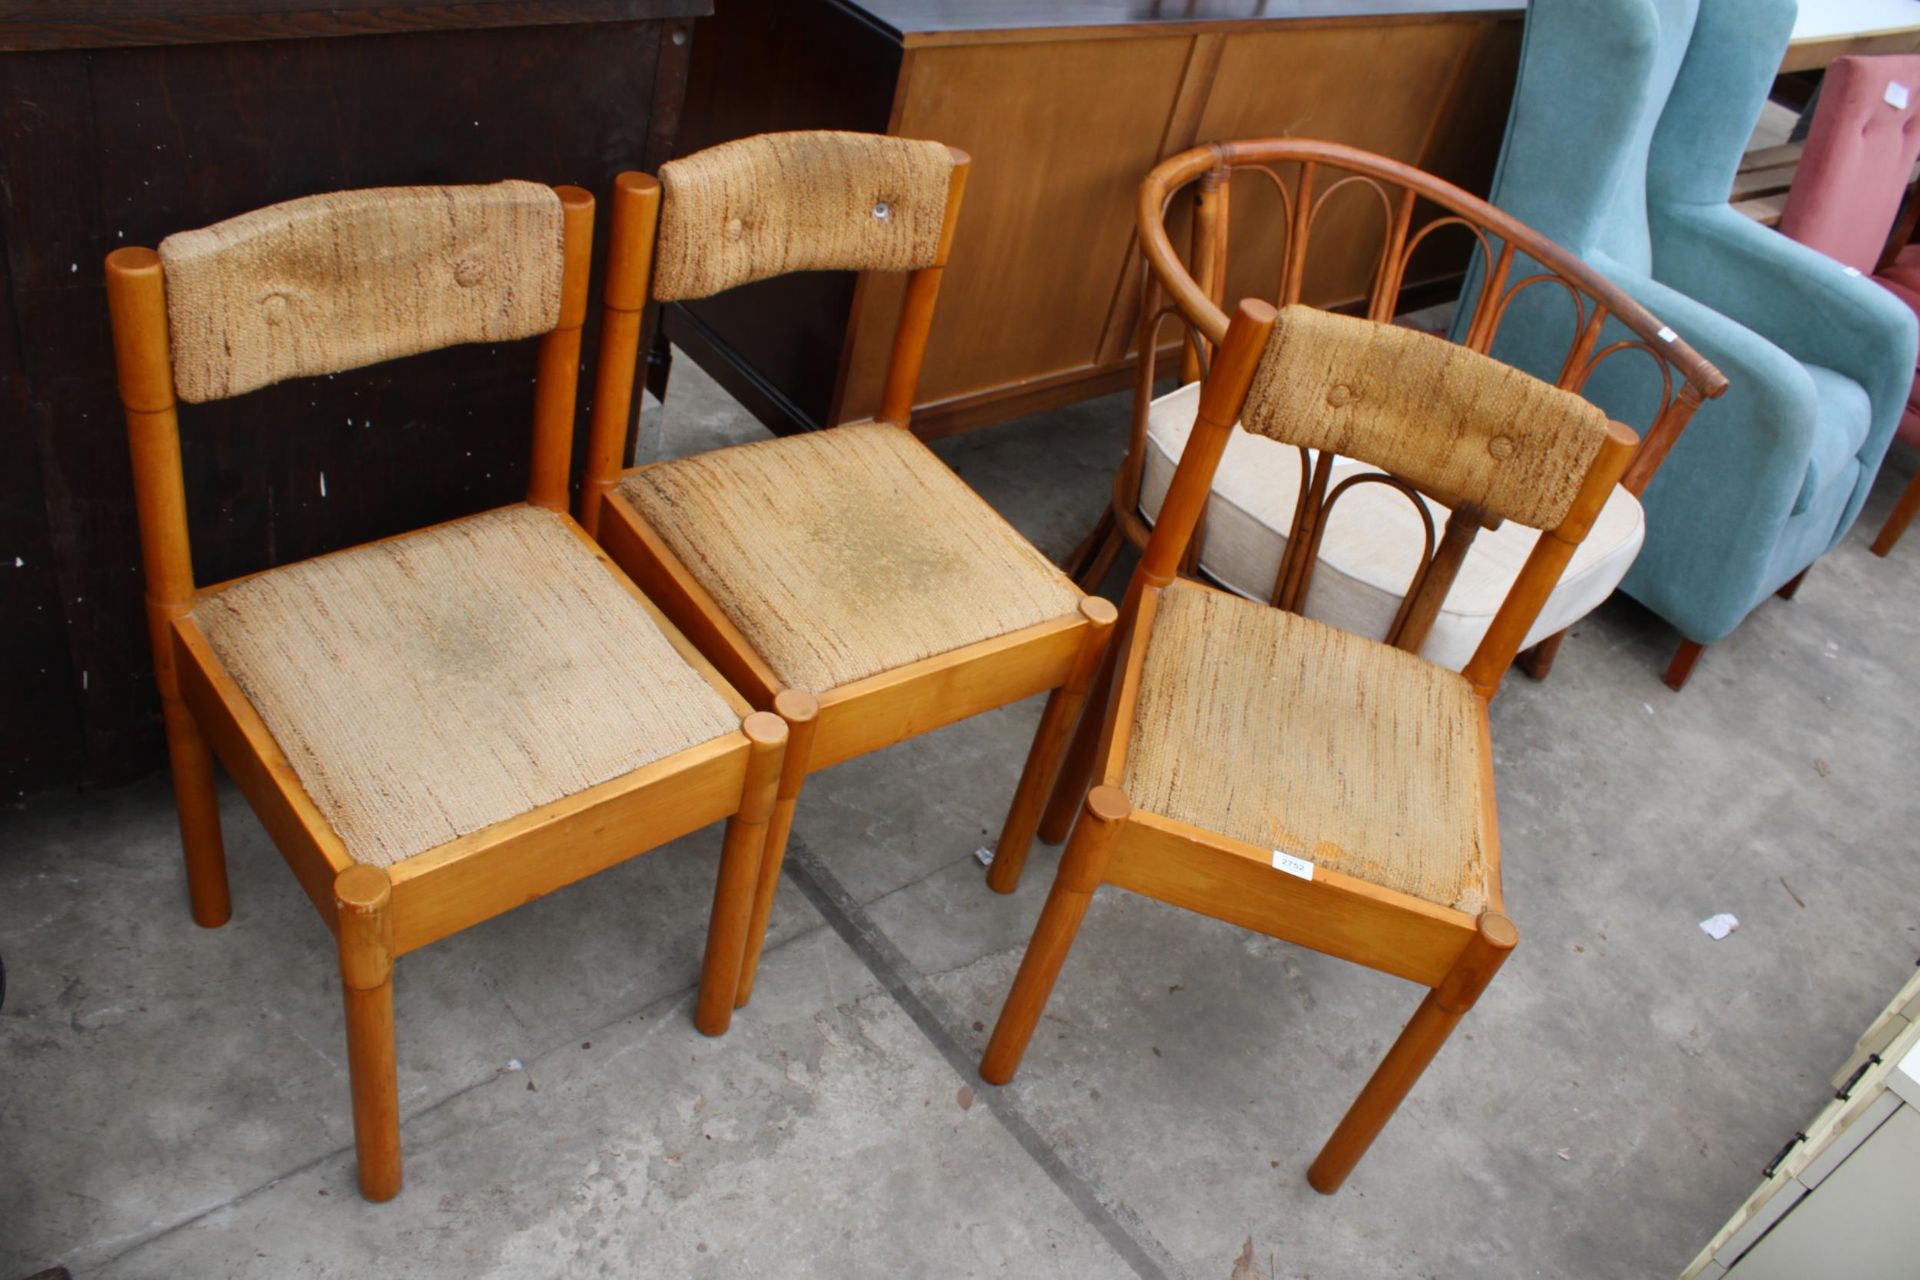 THREE RETRO DINETTE DINING CHAIRS